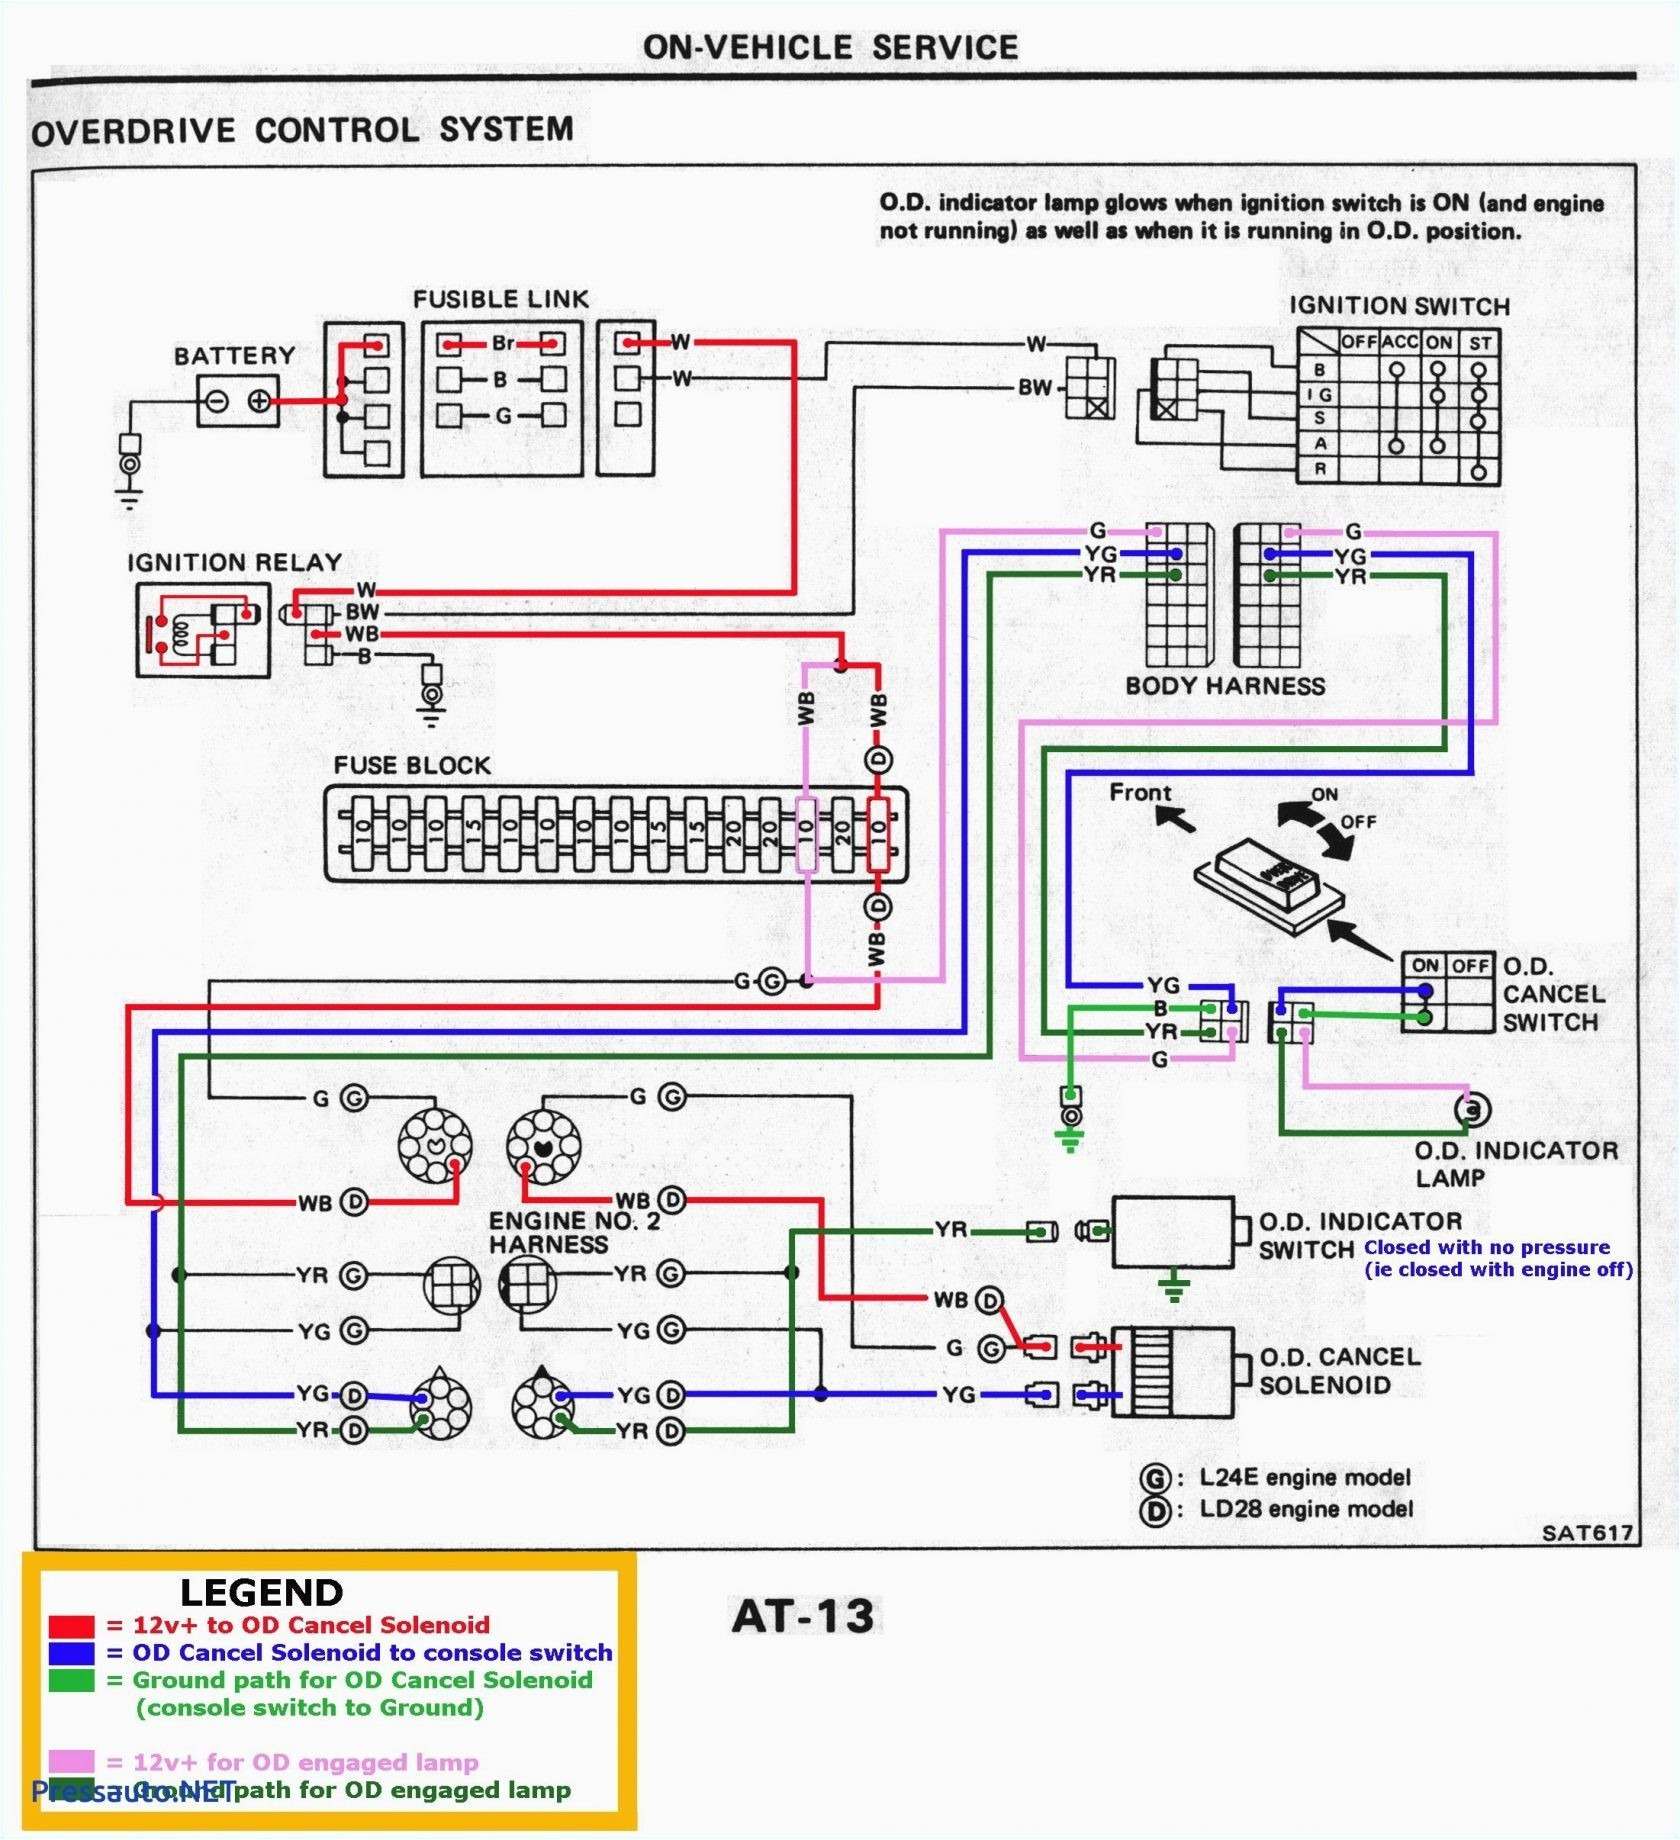 parker boat wiring diagram wiring diagrams for parker boat wiring diagram parker boat wiring diagram wiring